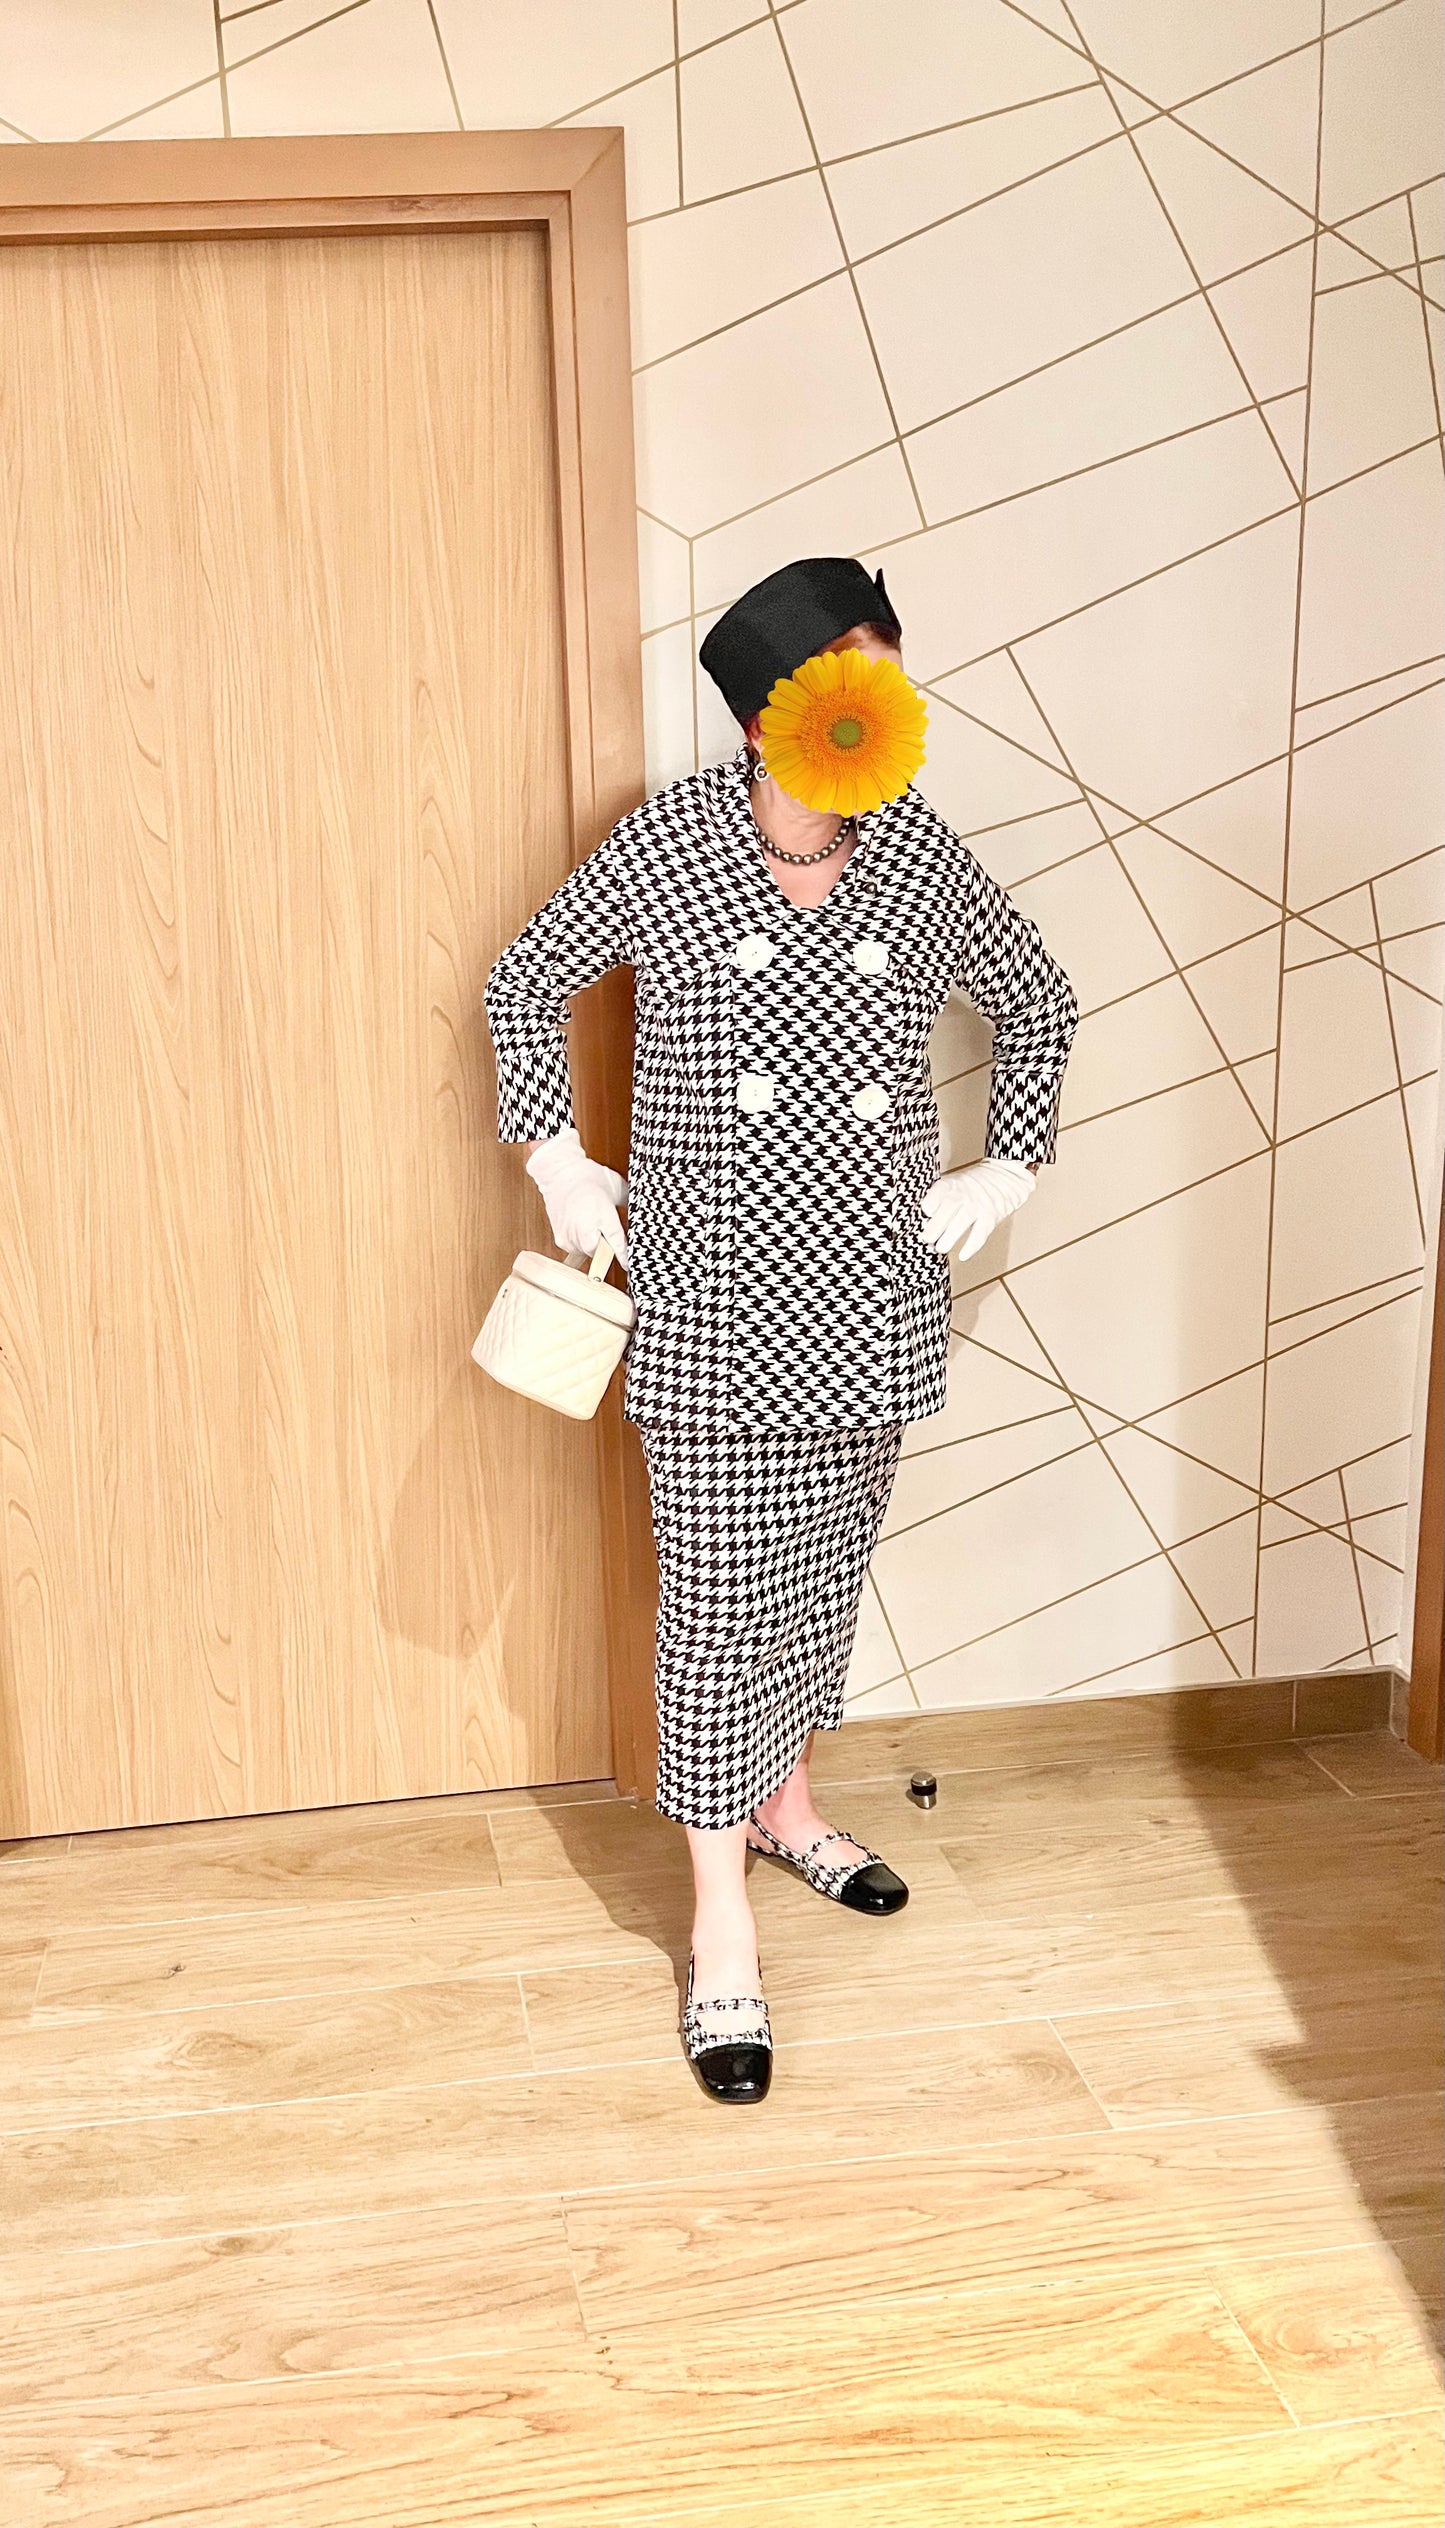 PRE-ORDER NEW: Houndstooth skirt suit!